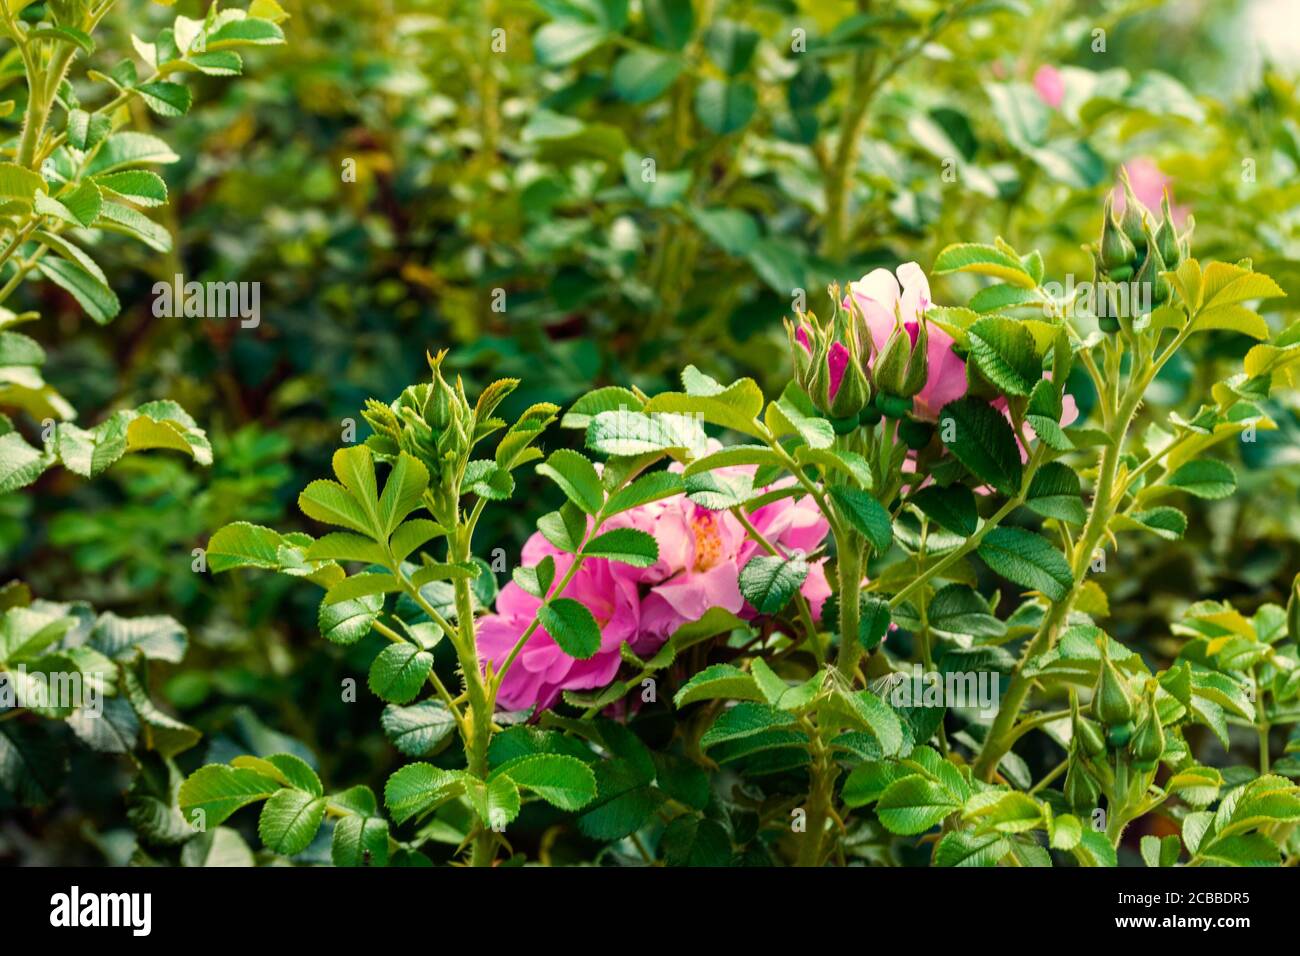 Beauty in nature. flower among the green leaves. The photo was taken in the Chelyabinsk Botanical Garden. Stock Photo